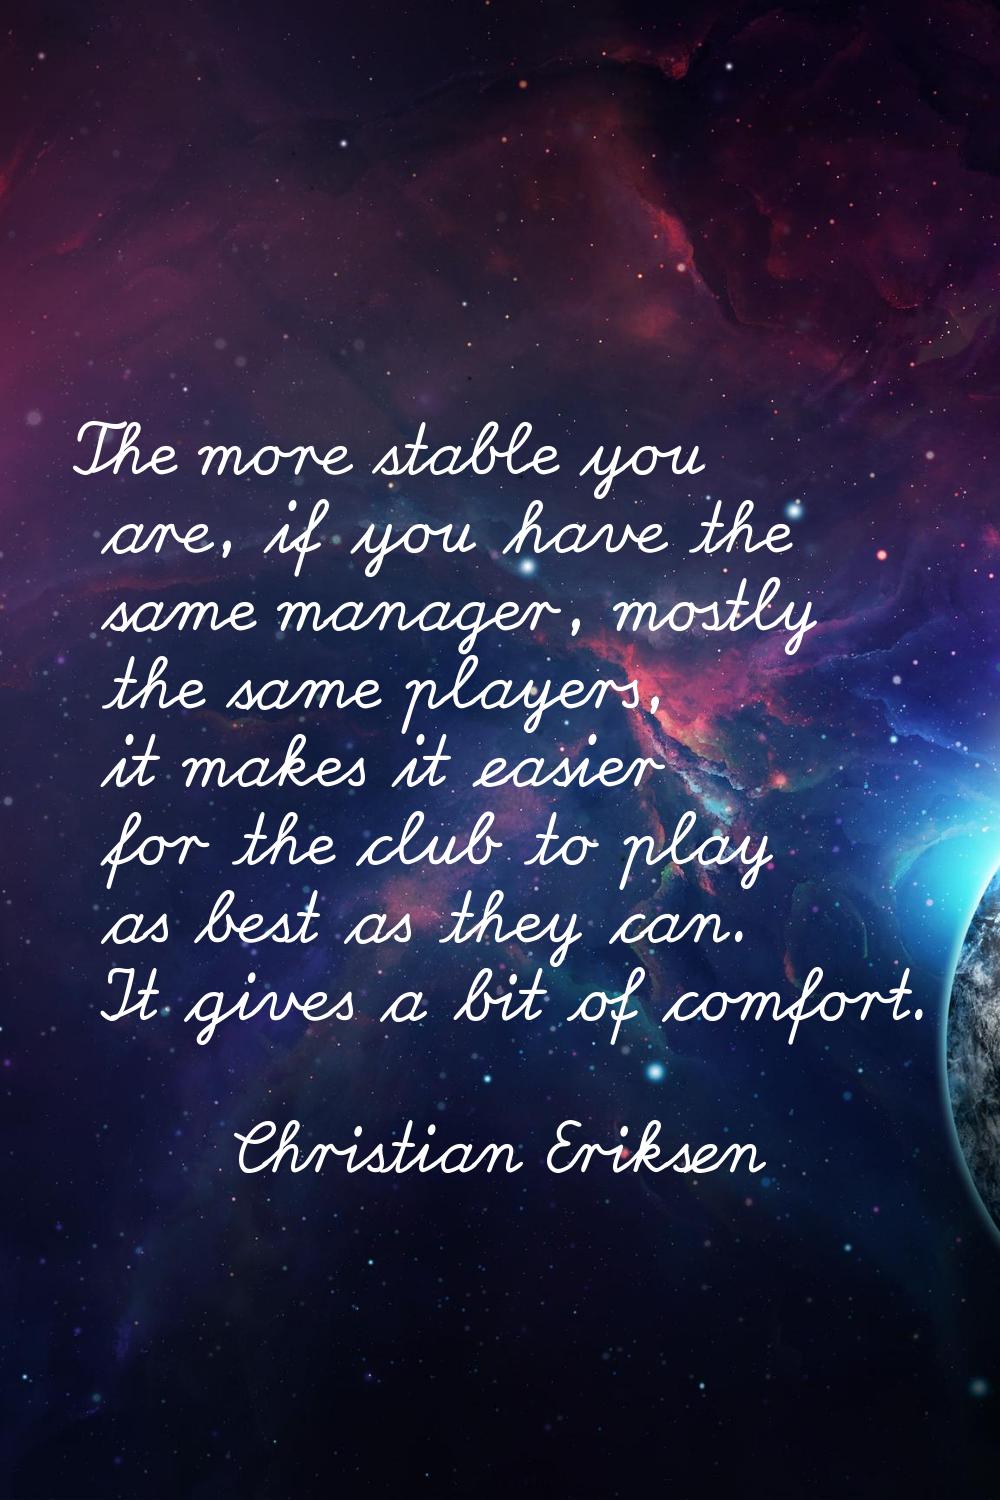 The more stable you are, if you have the same manager, mostly the same players, it makes it easier 